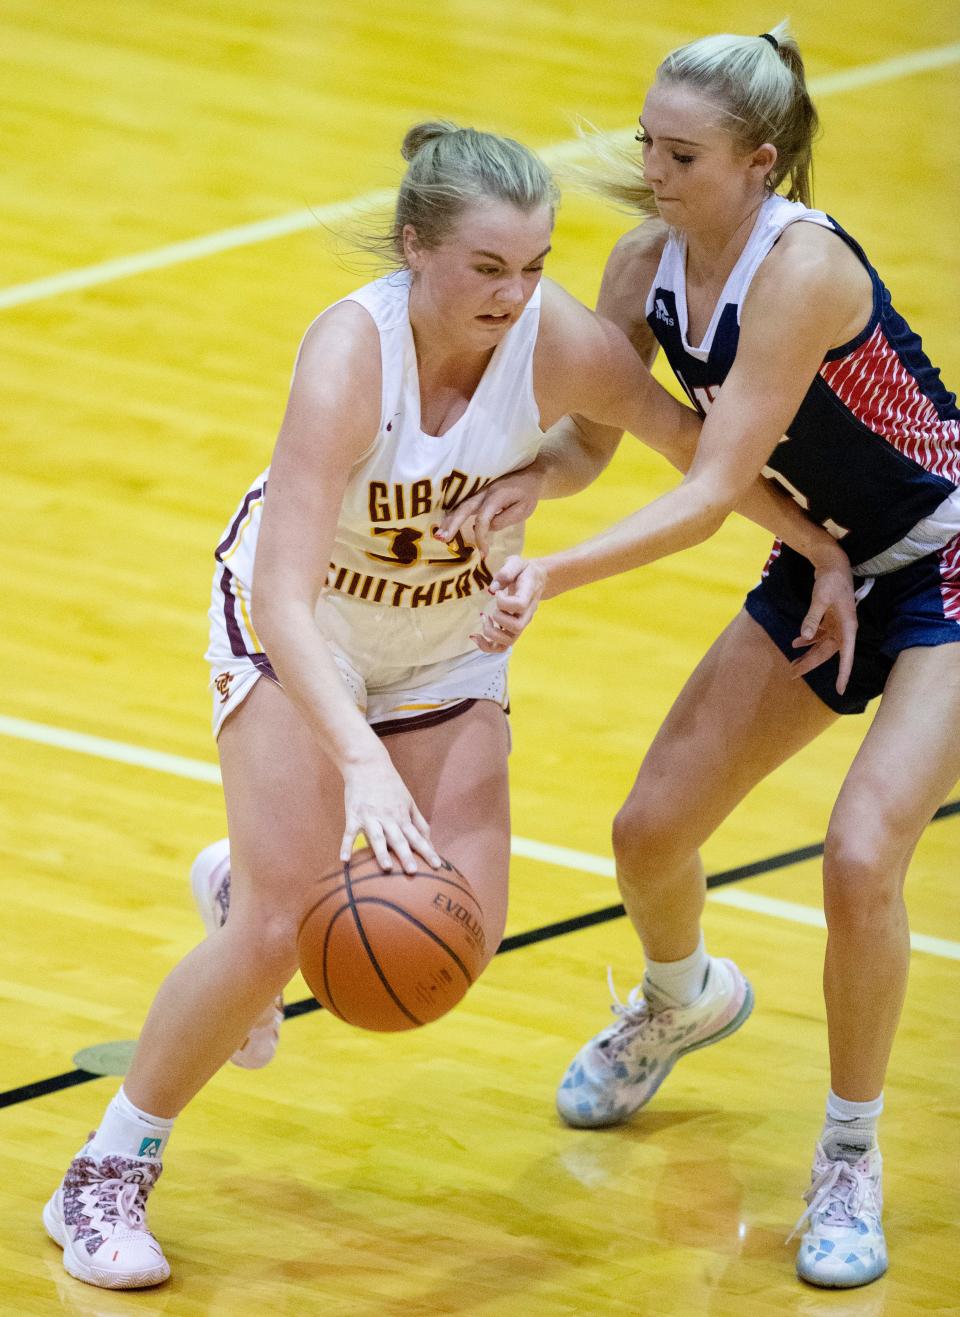 Gibson Southern's Ava Weisheit (33) drives against North Lawrence's Chloe Spreen (2) during the North Basketball Showcase at North High School Friday night, Dec. 2, 2022.